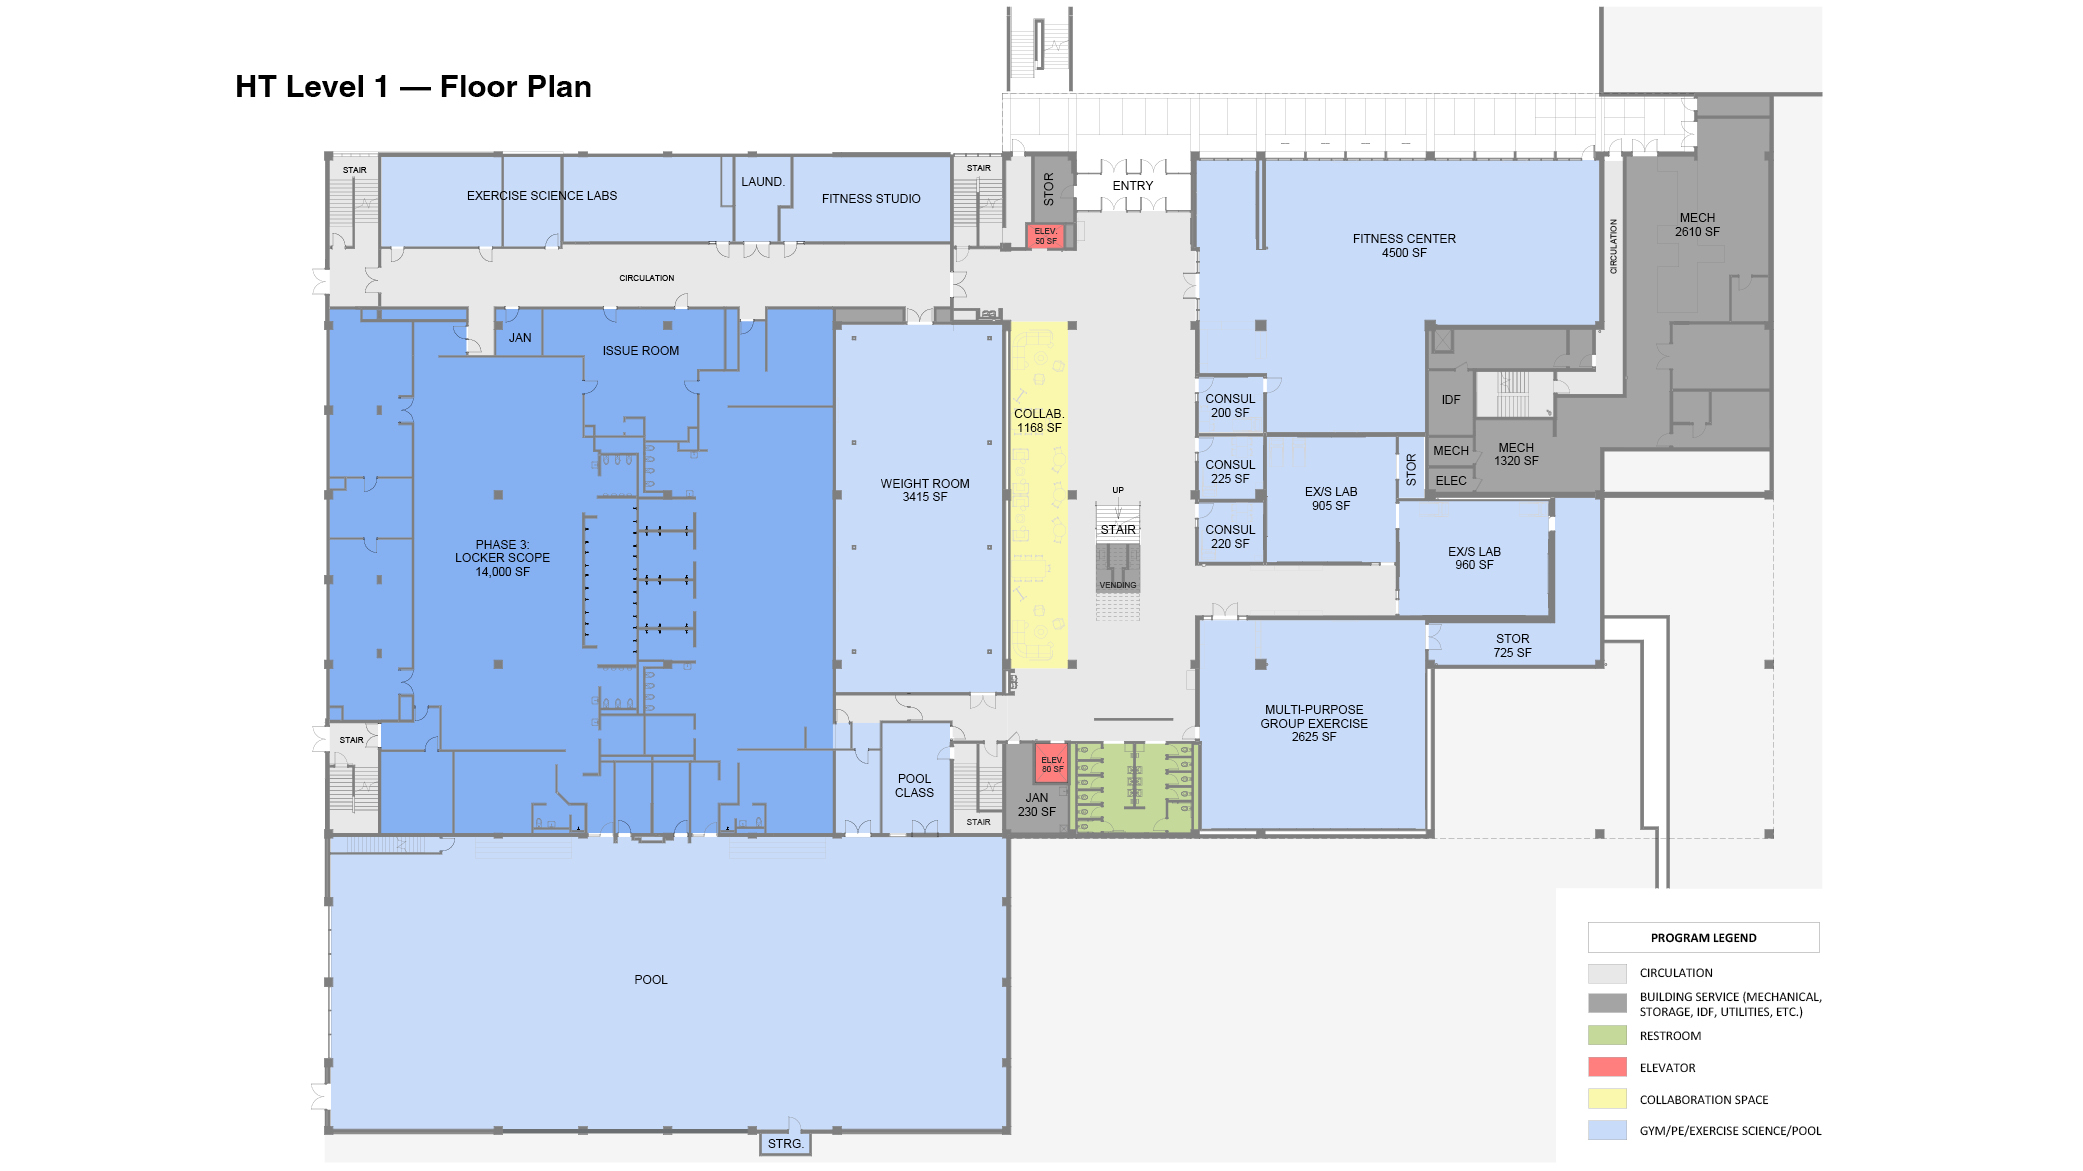 HT Level 1 floor plan, showing areas for the pool, locker room, and the new areas being the fitness center, a multipurpose group exercise class, all-user restrooms, and collaboration areas